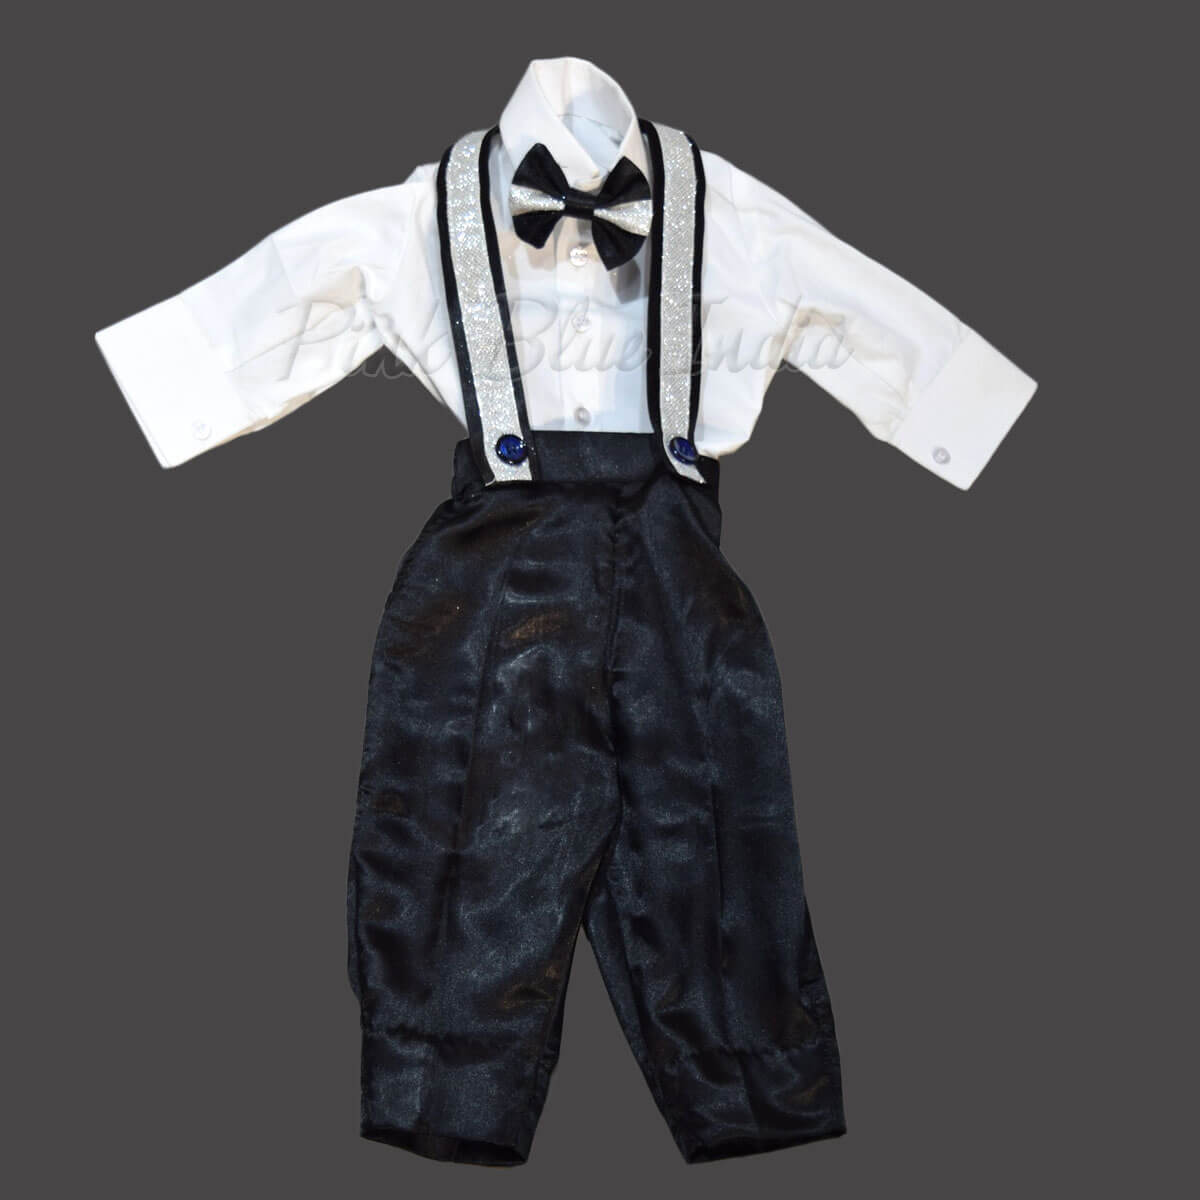 baby boy black and white suspenders outfit